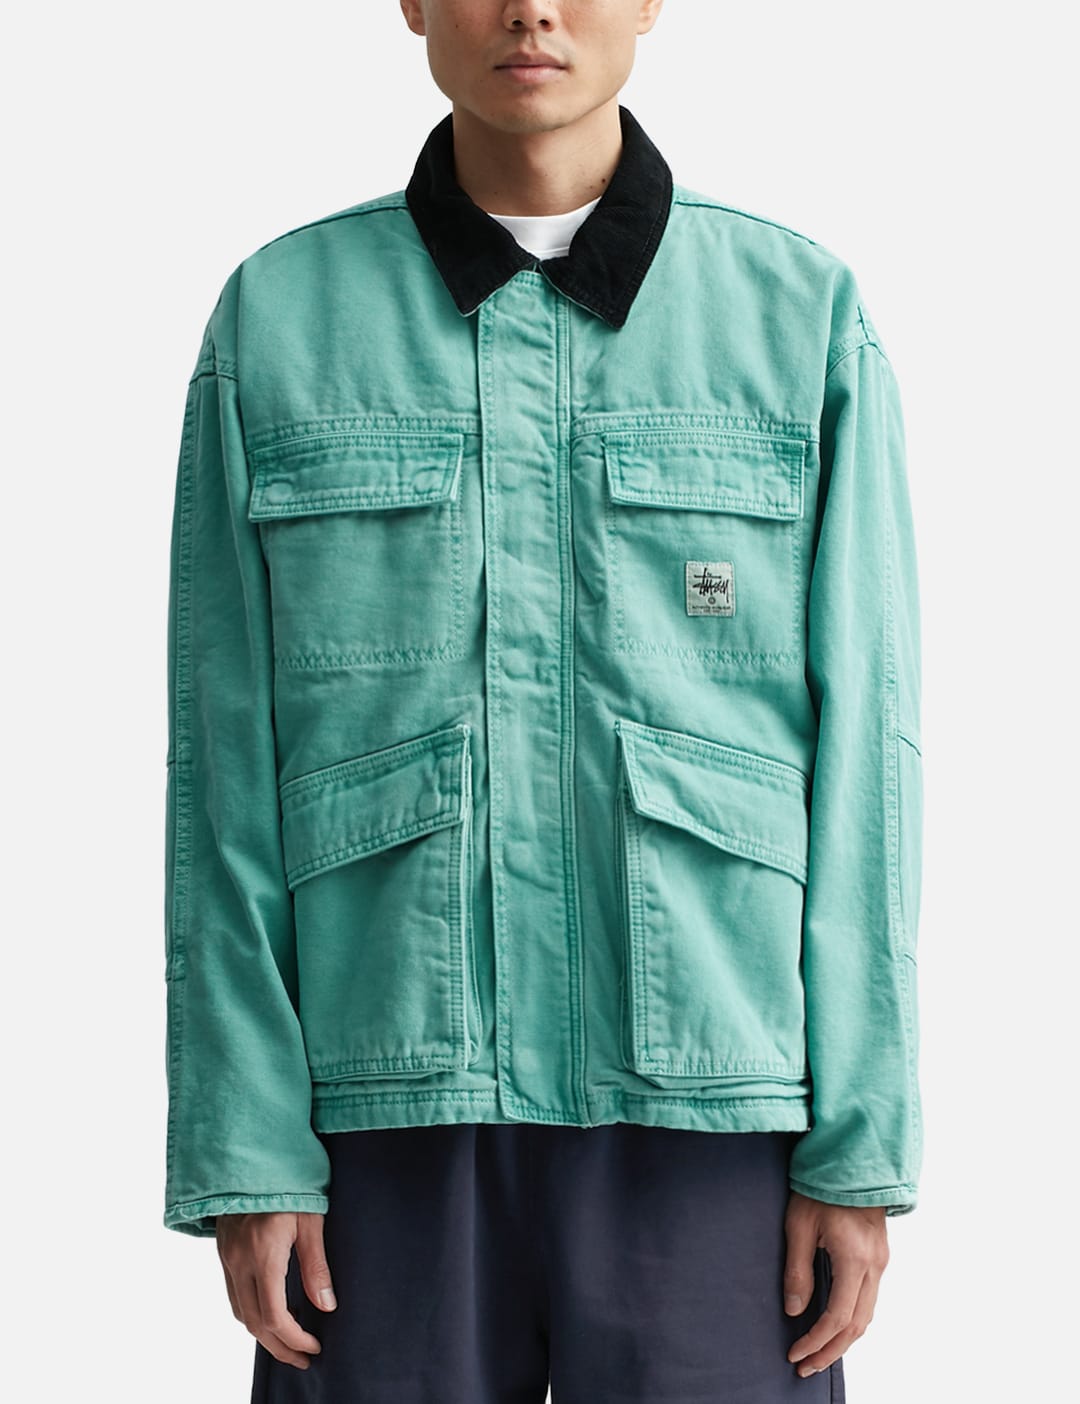 Stüssy   Washed Canvas Shop Jacket   HBX   Globally Curated